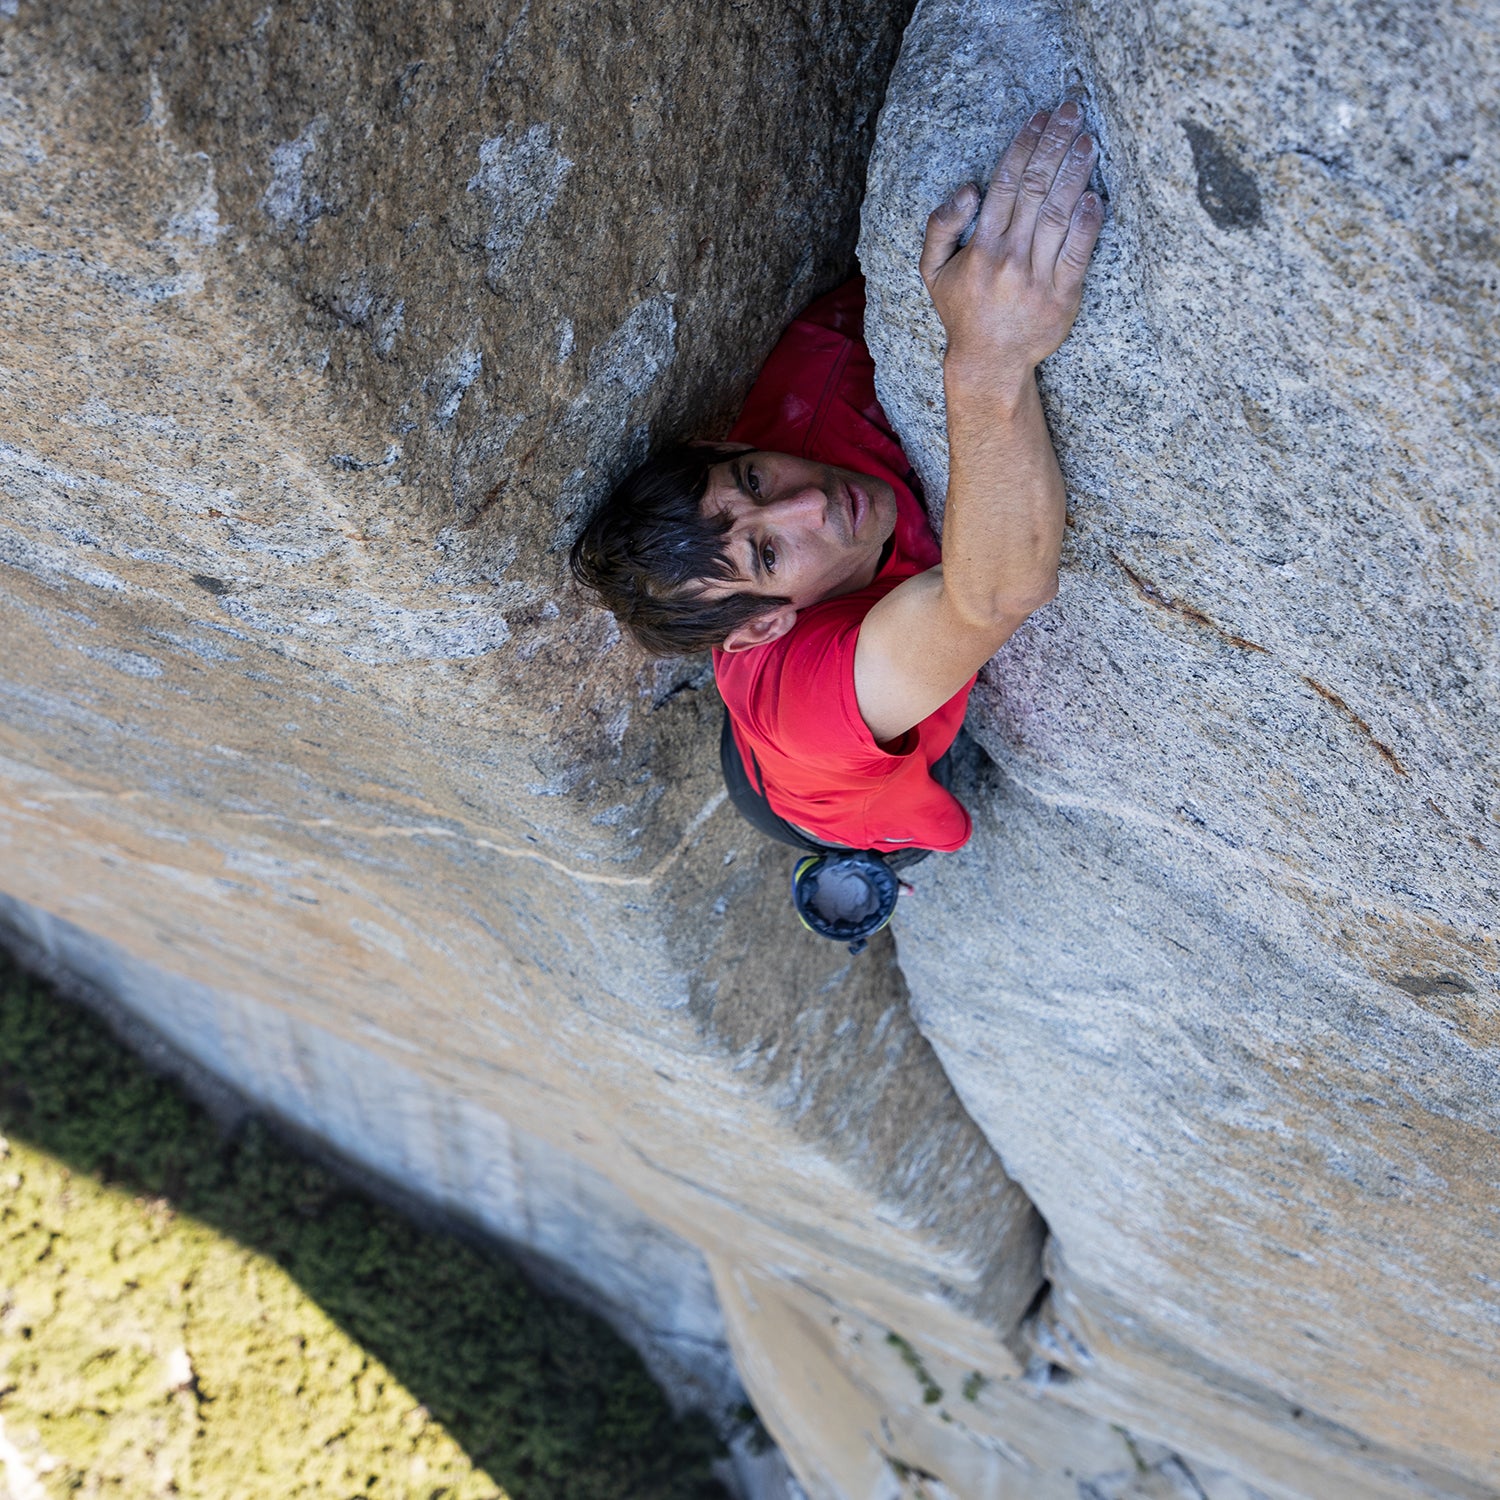 How to Watch Free Solo Online